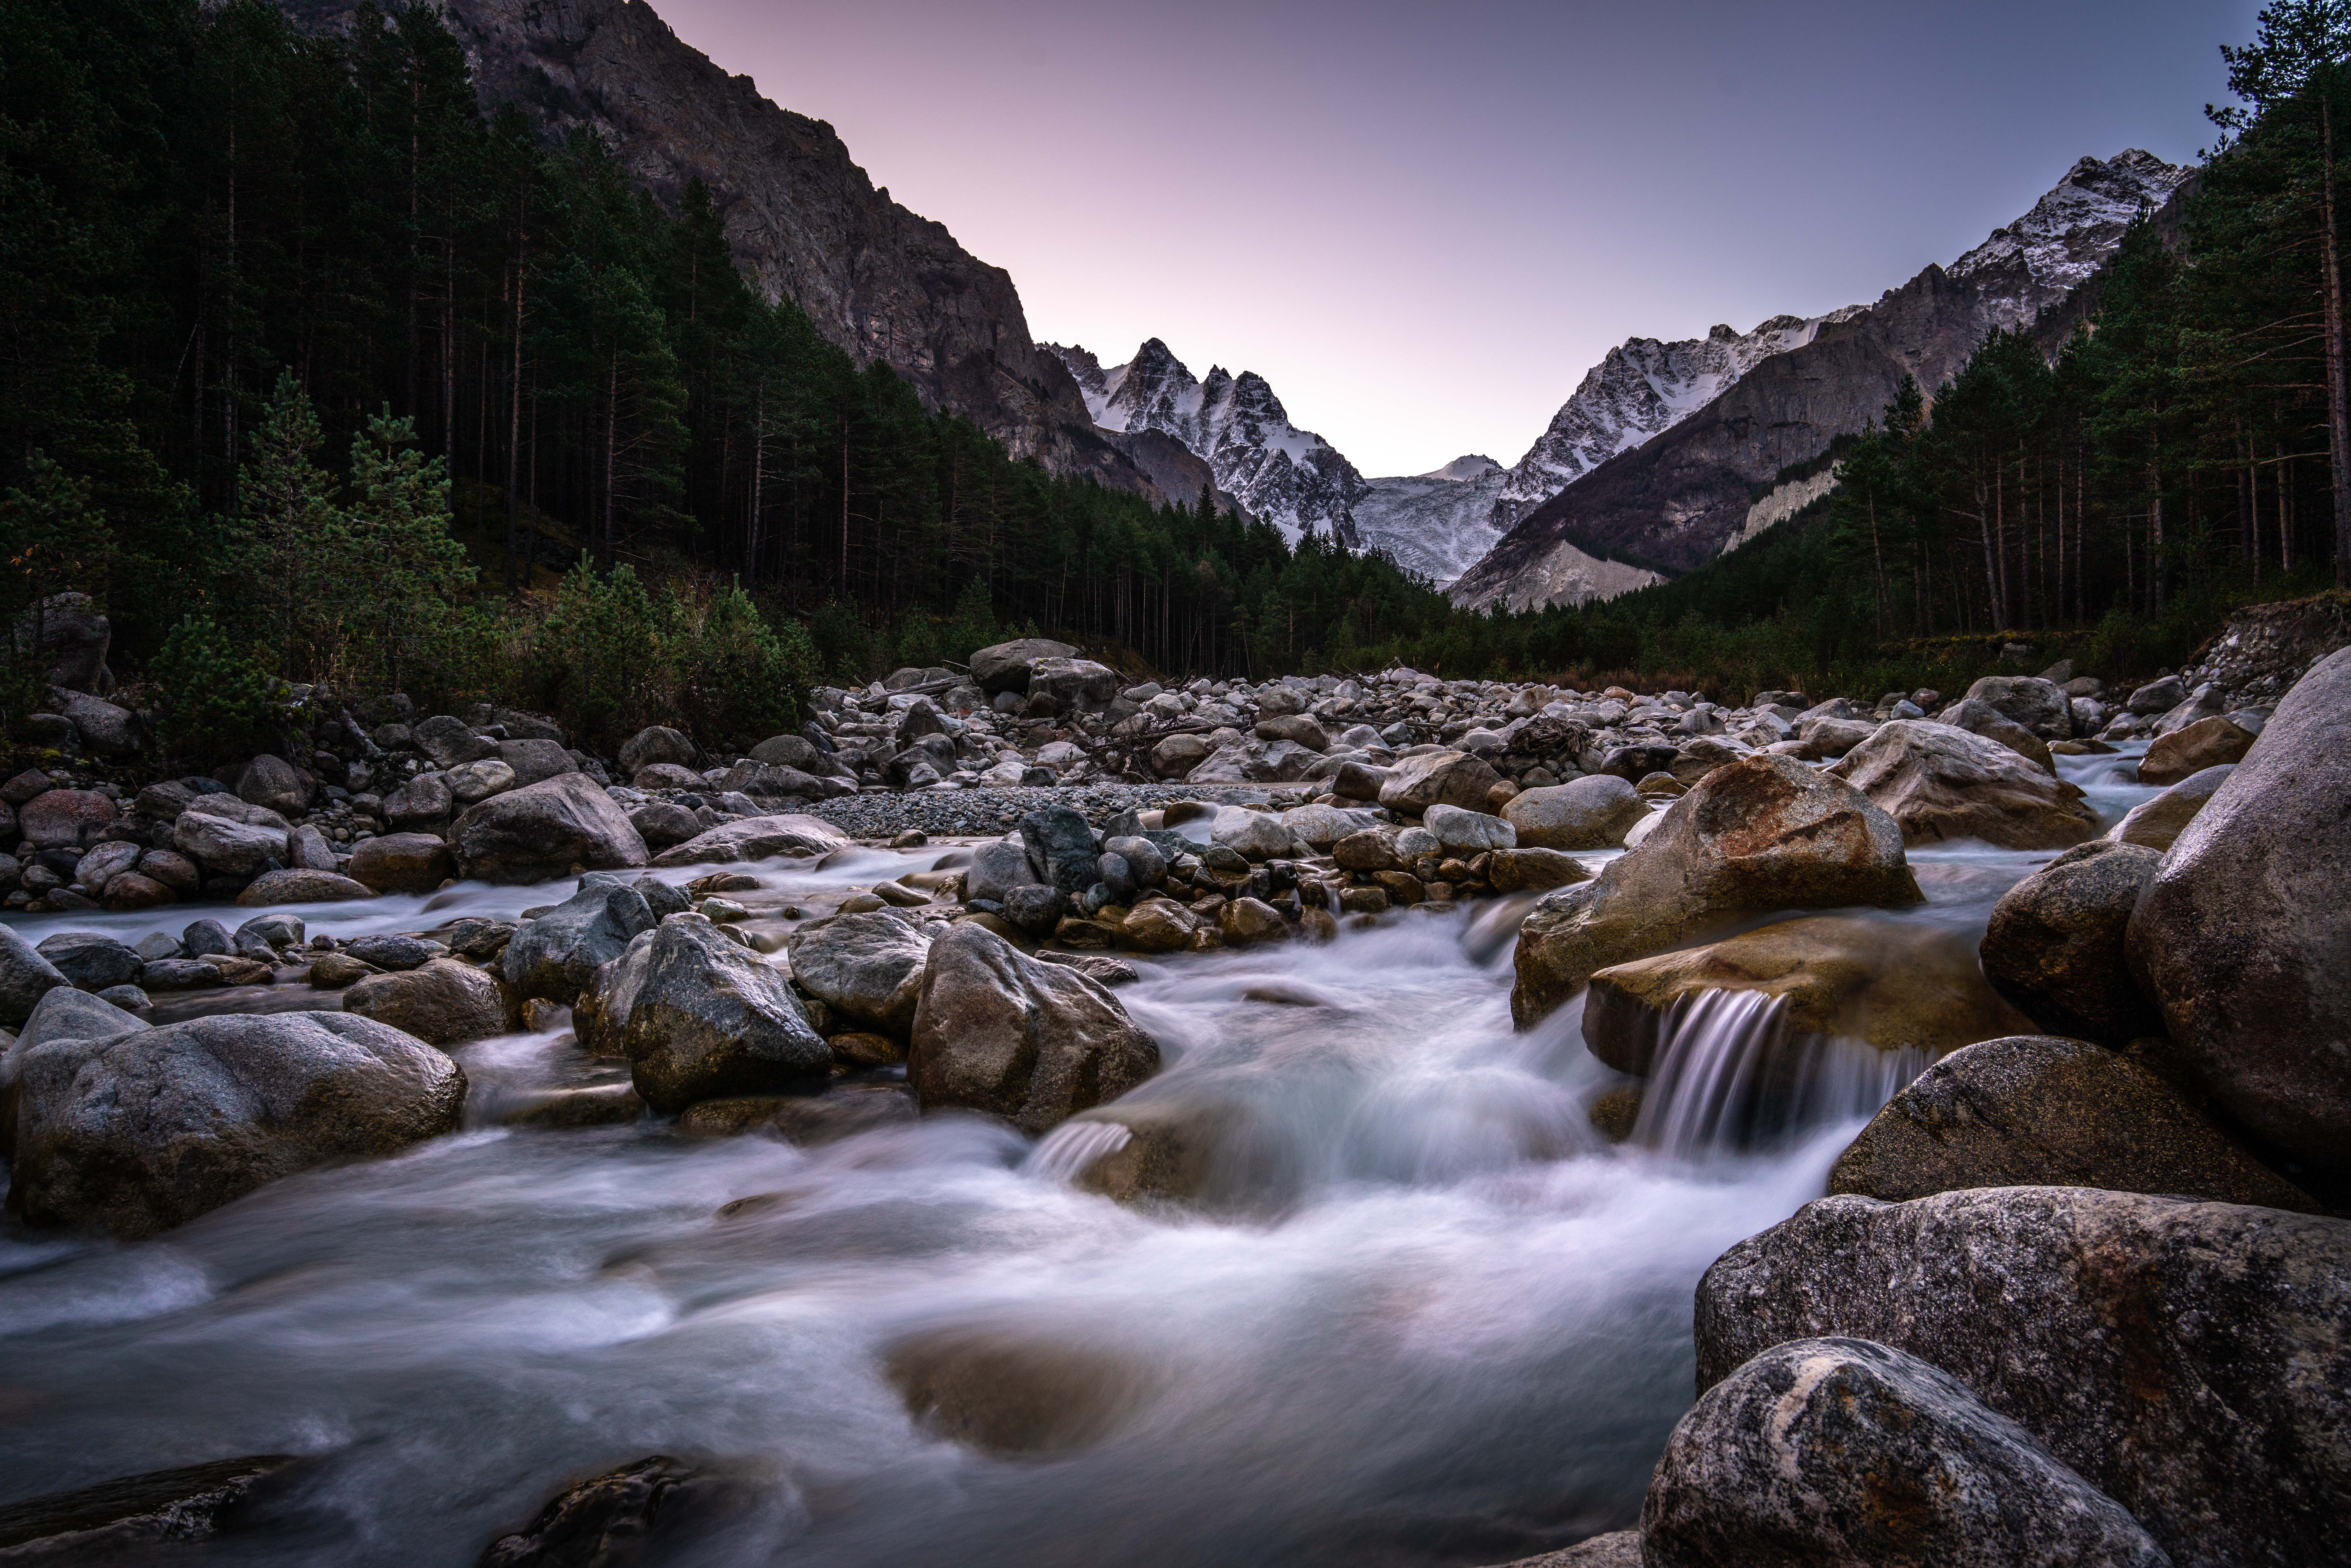 General 7751x5170 mountains Glacier River forest clear sky sunset rocks Alania national park North Ossetia nature river